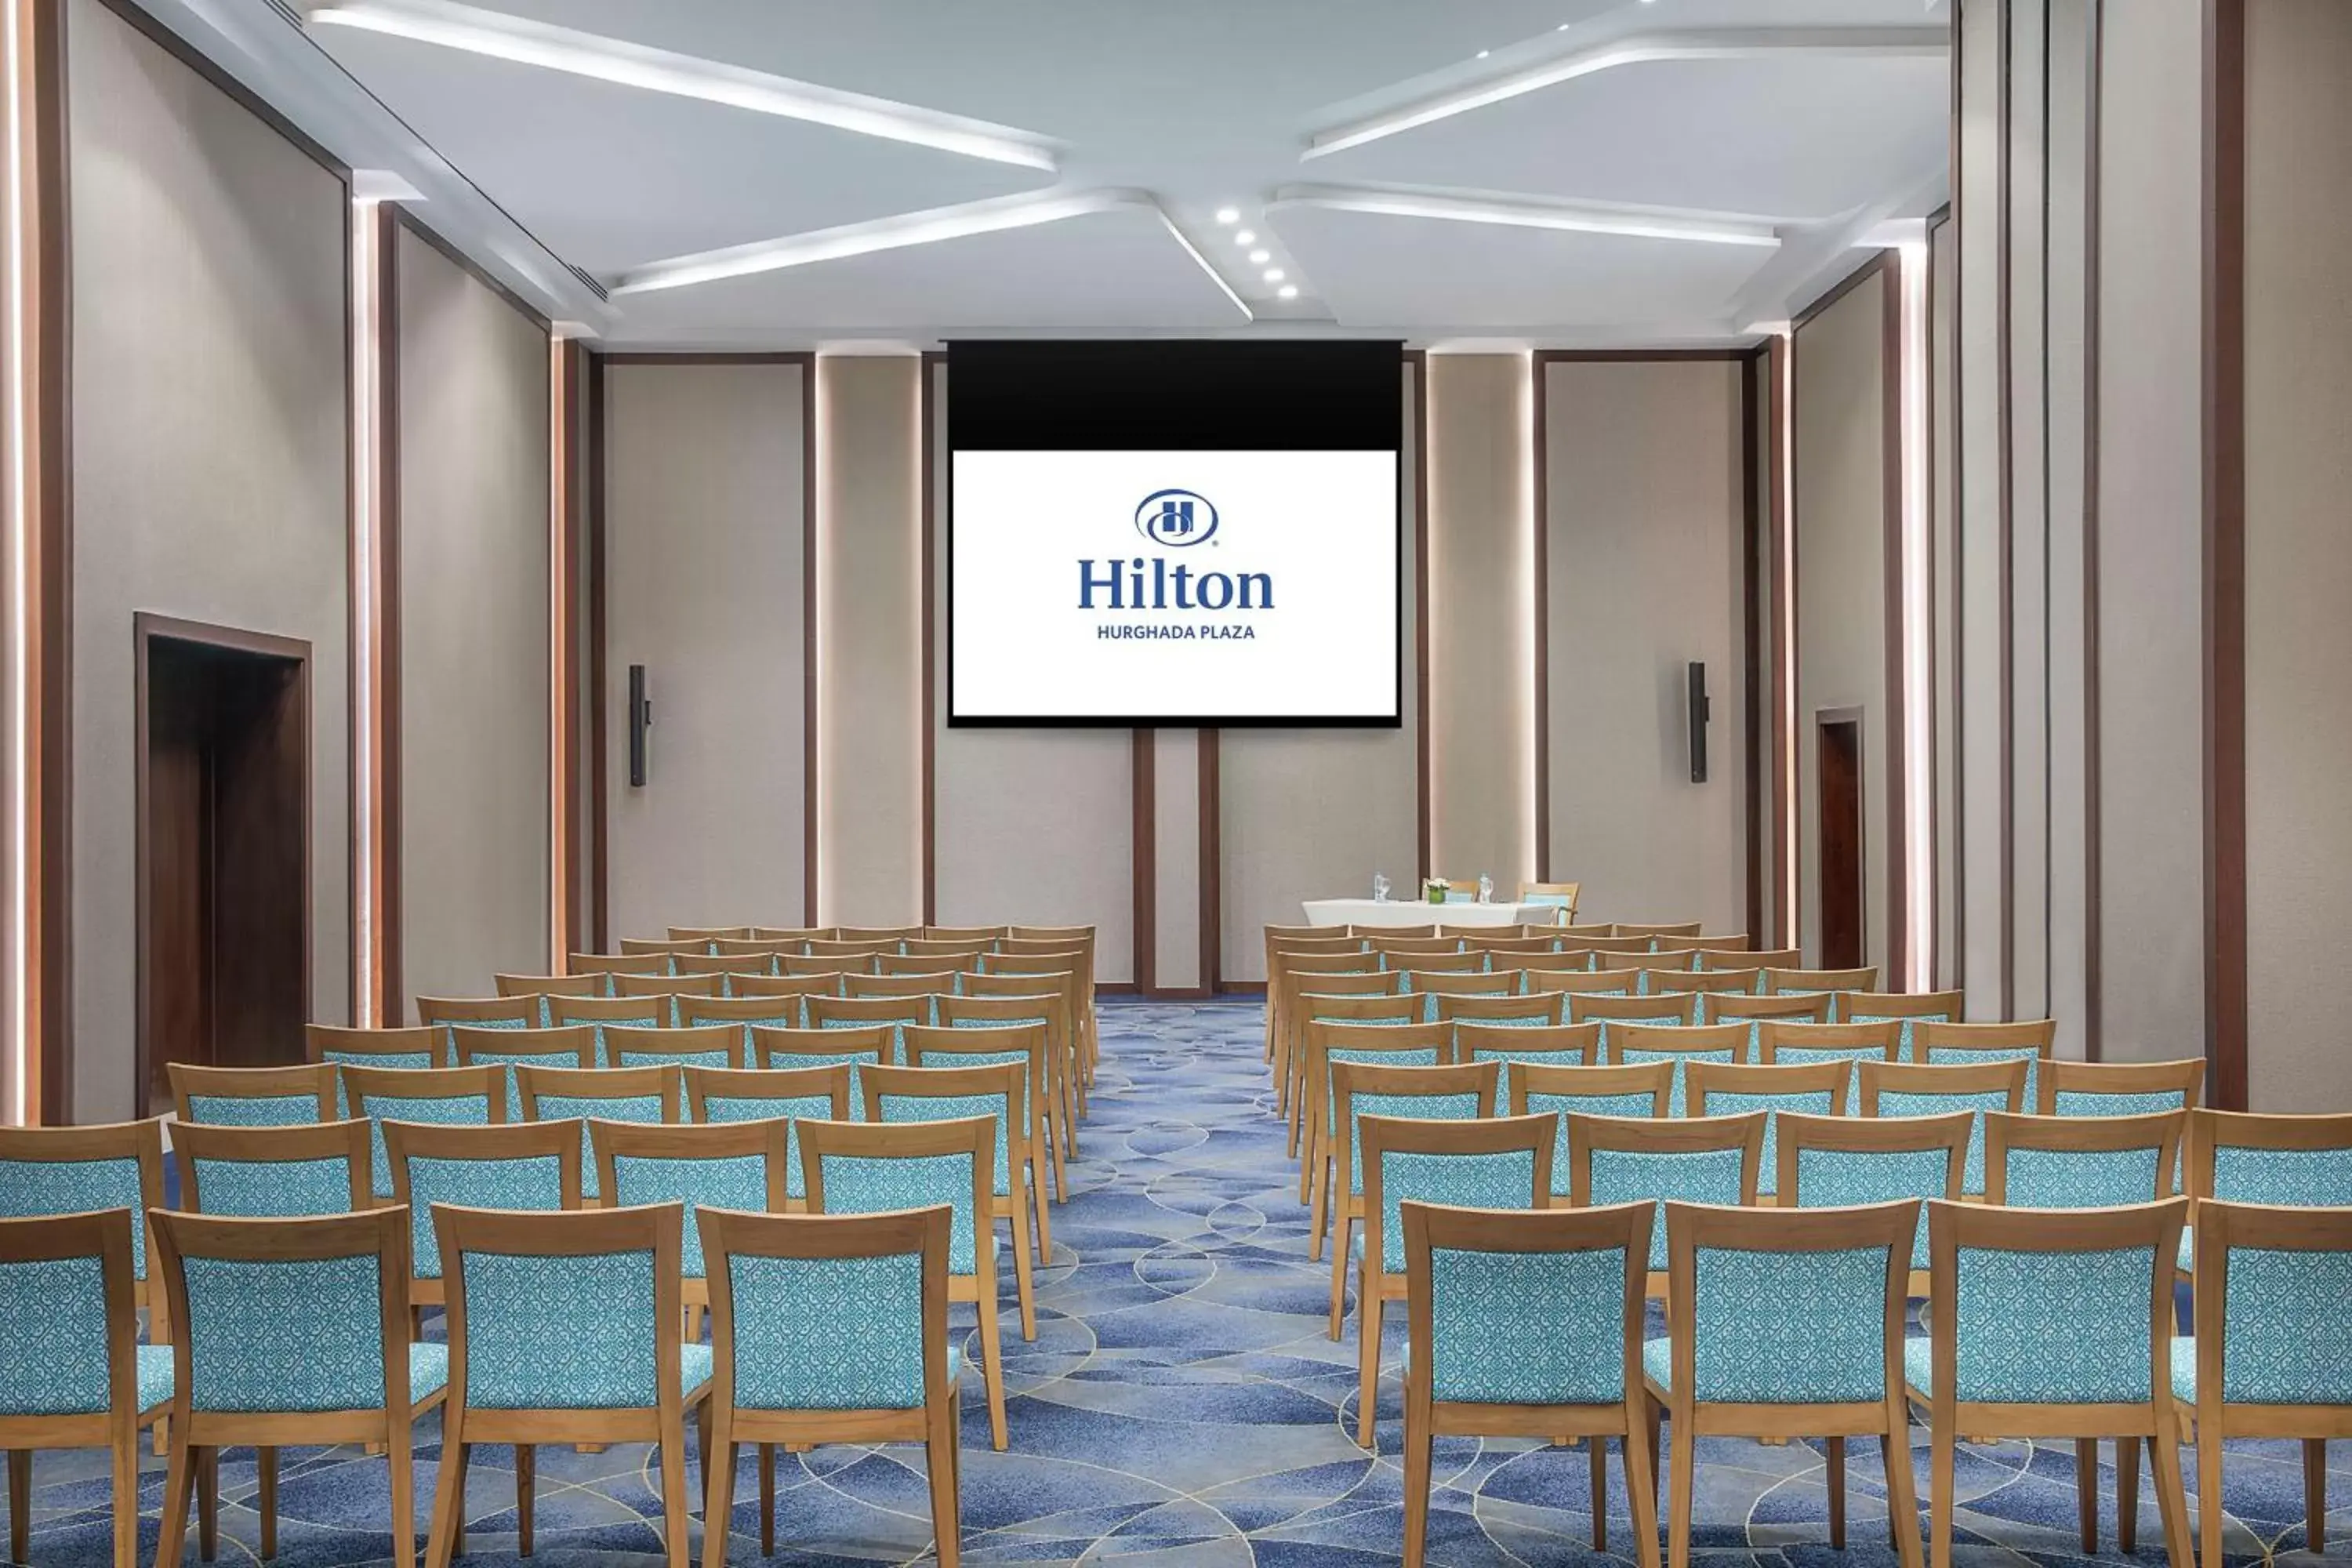 Meeting/conference room in Hilton Hurghada Plaza Hotel